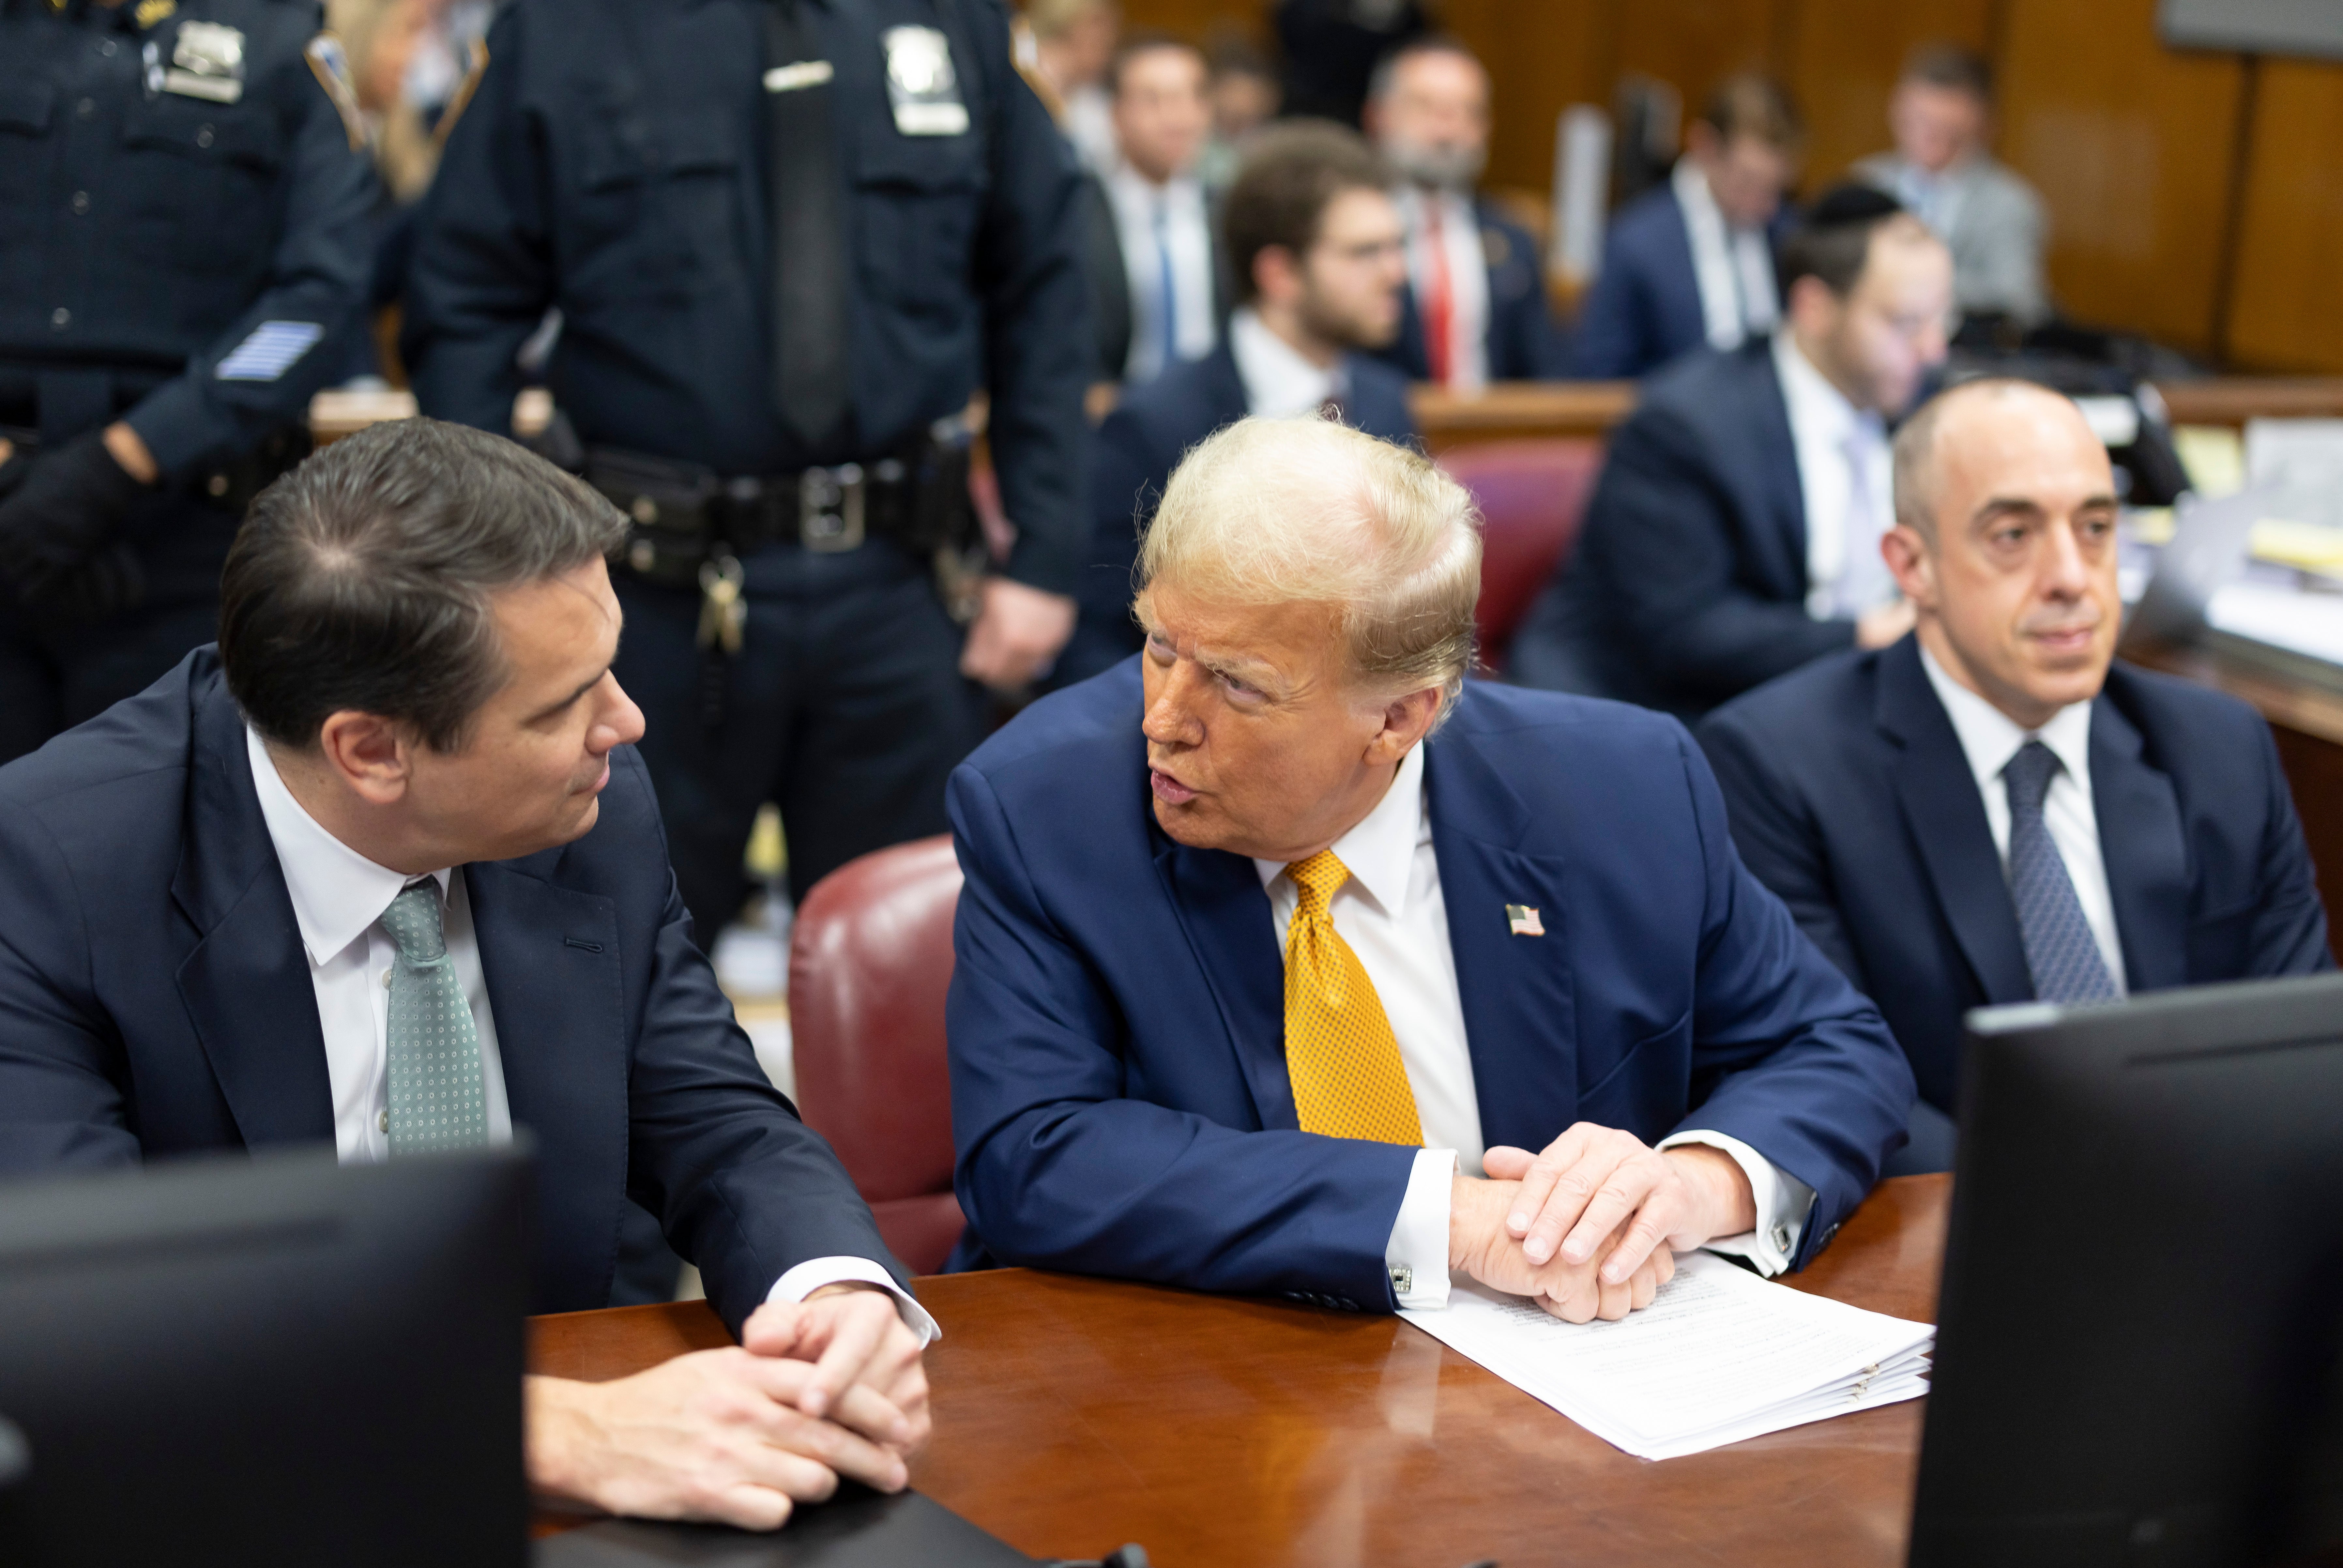 Donald Trump speaks with his attorneys during his hush money trial in Manhattan on 14 May